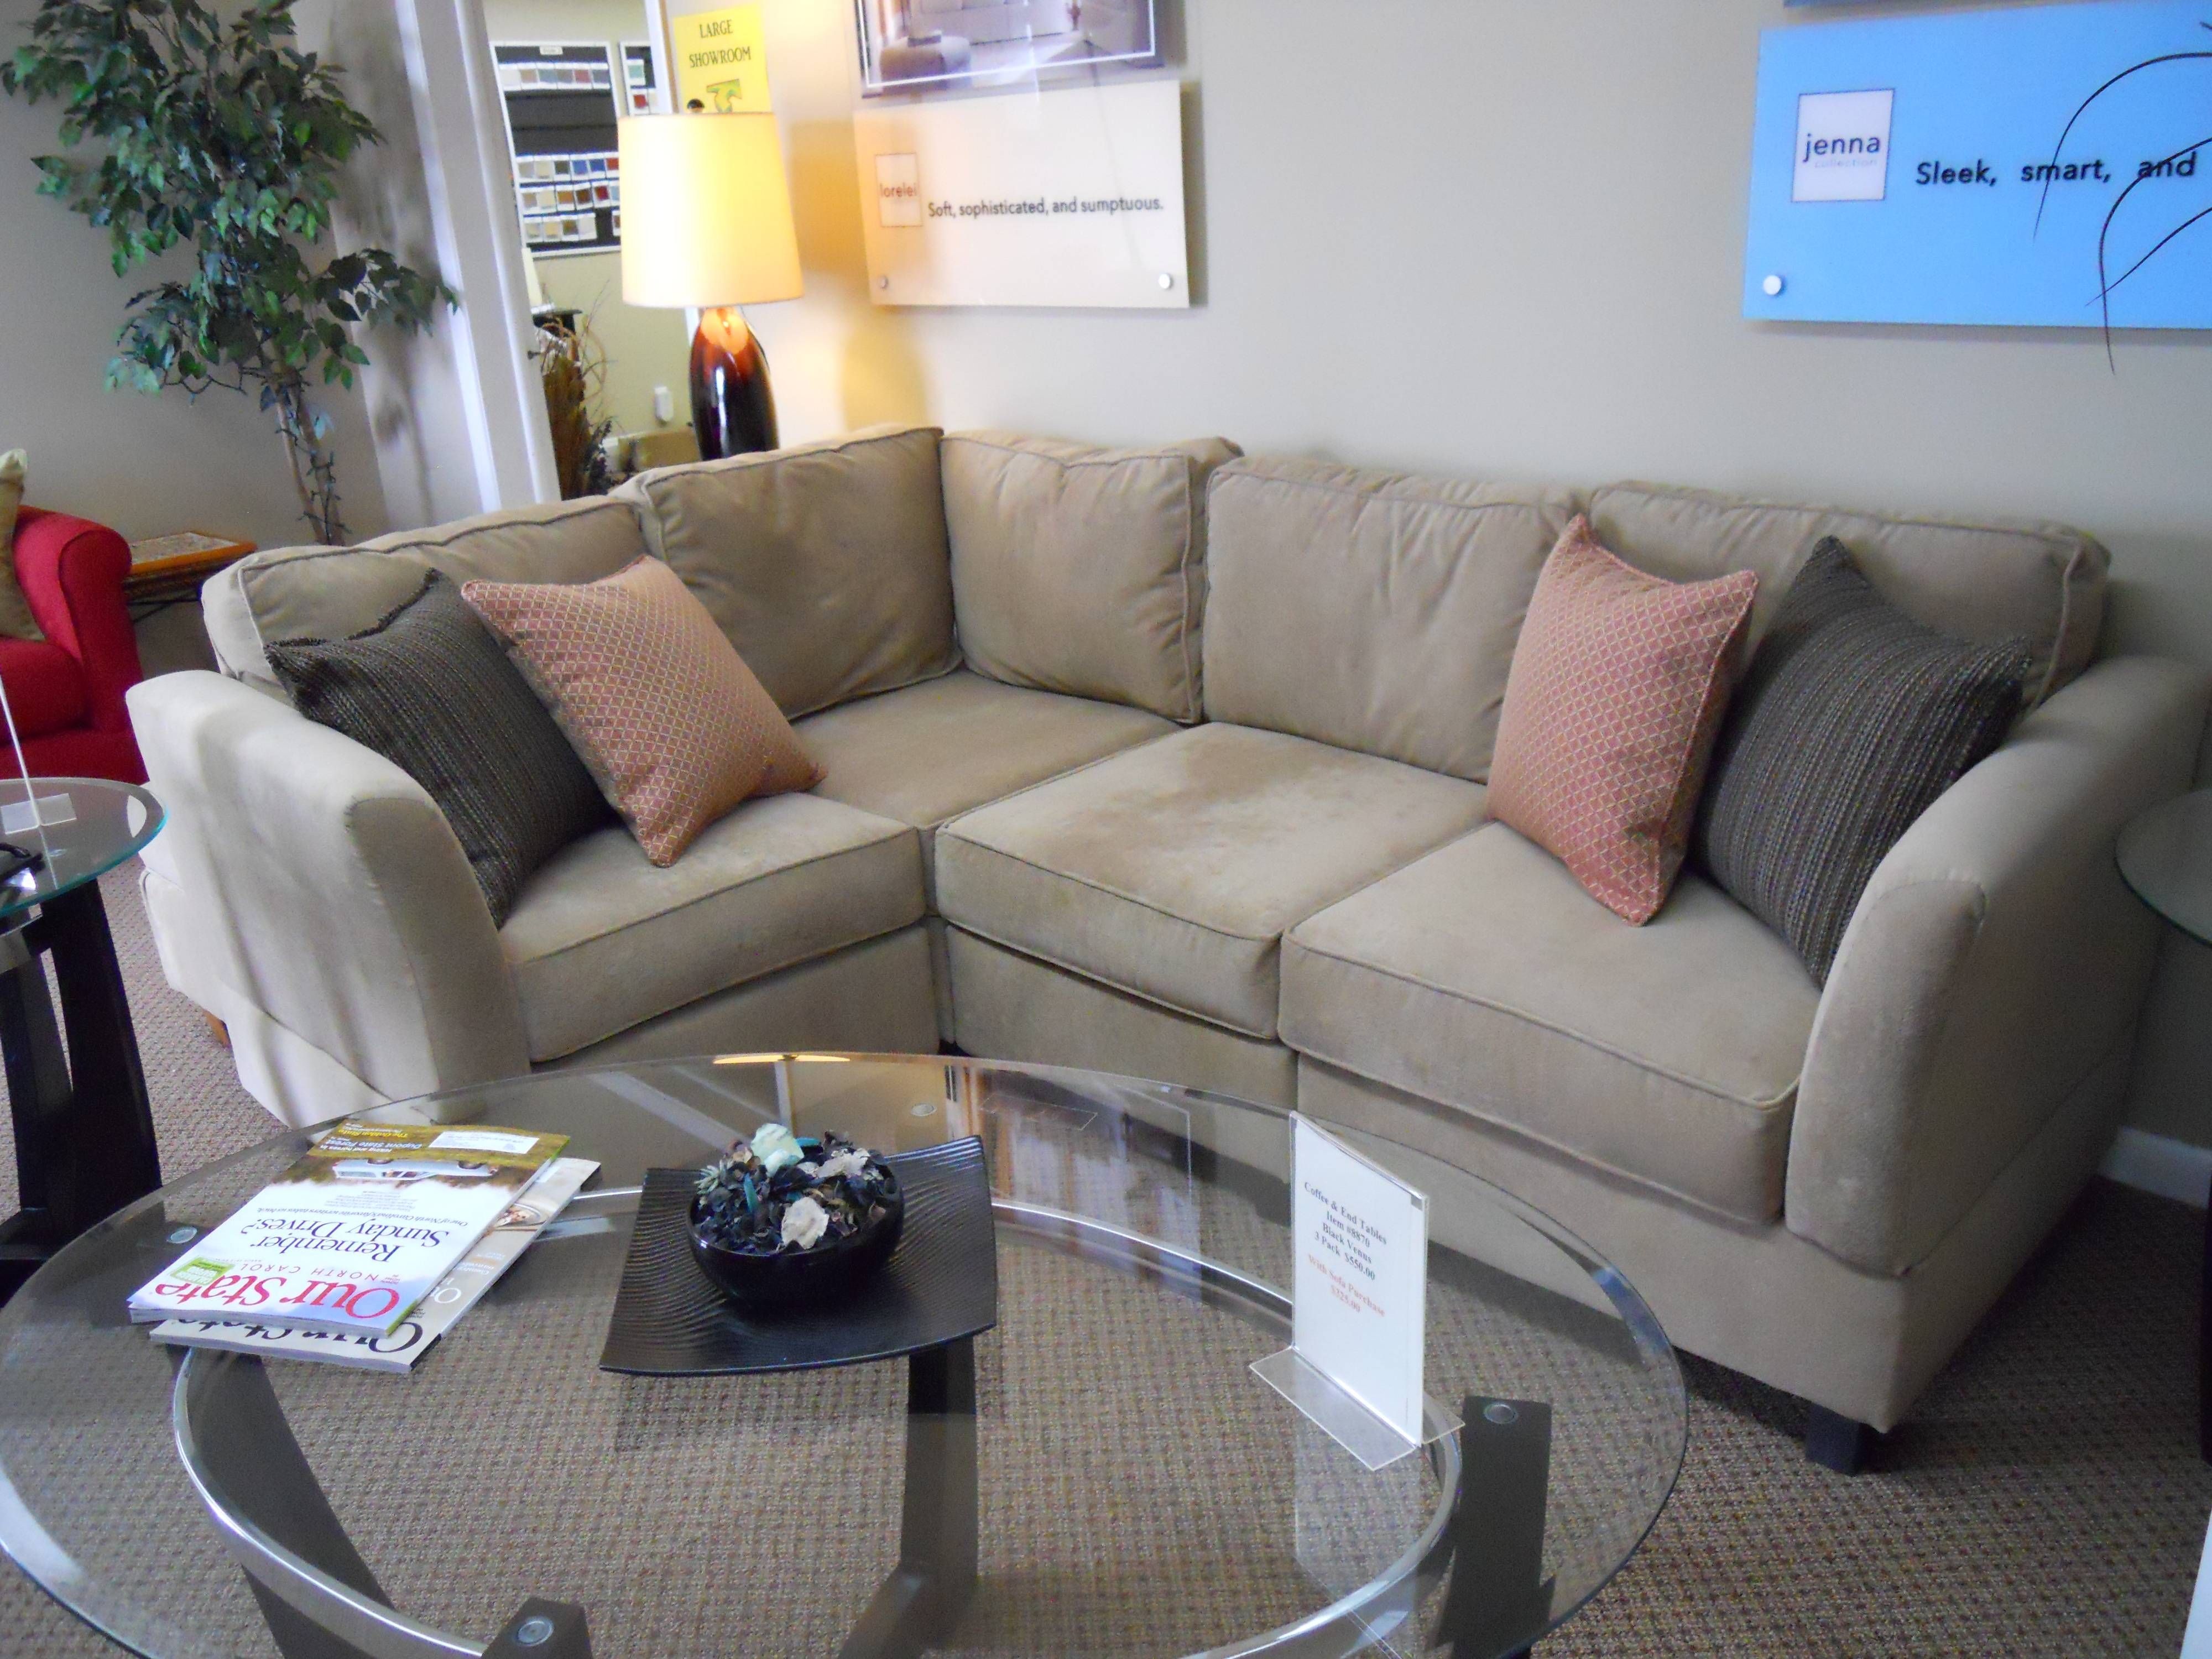 Small L Shaped Sectional Sofas | Centerfieldbar With Regard To Small L Shaped Sectional Sofas (View 3 of 15)